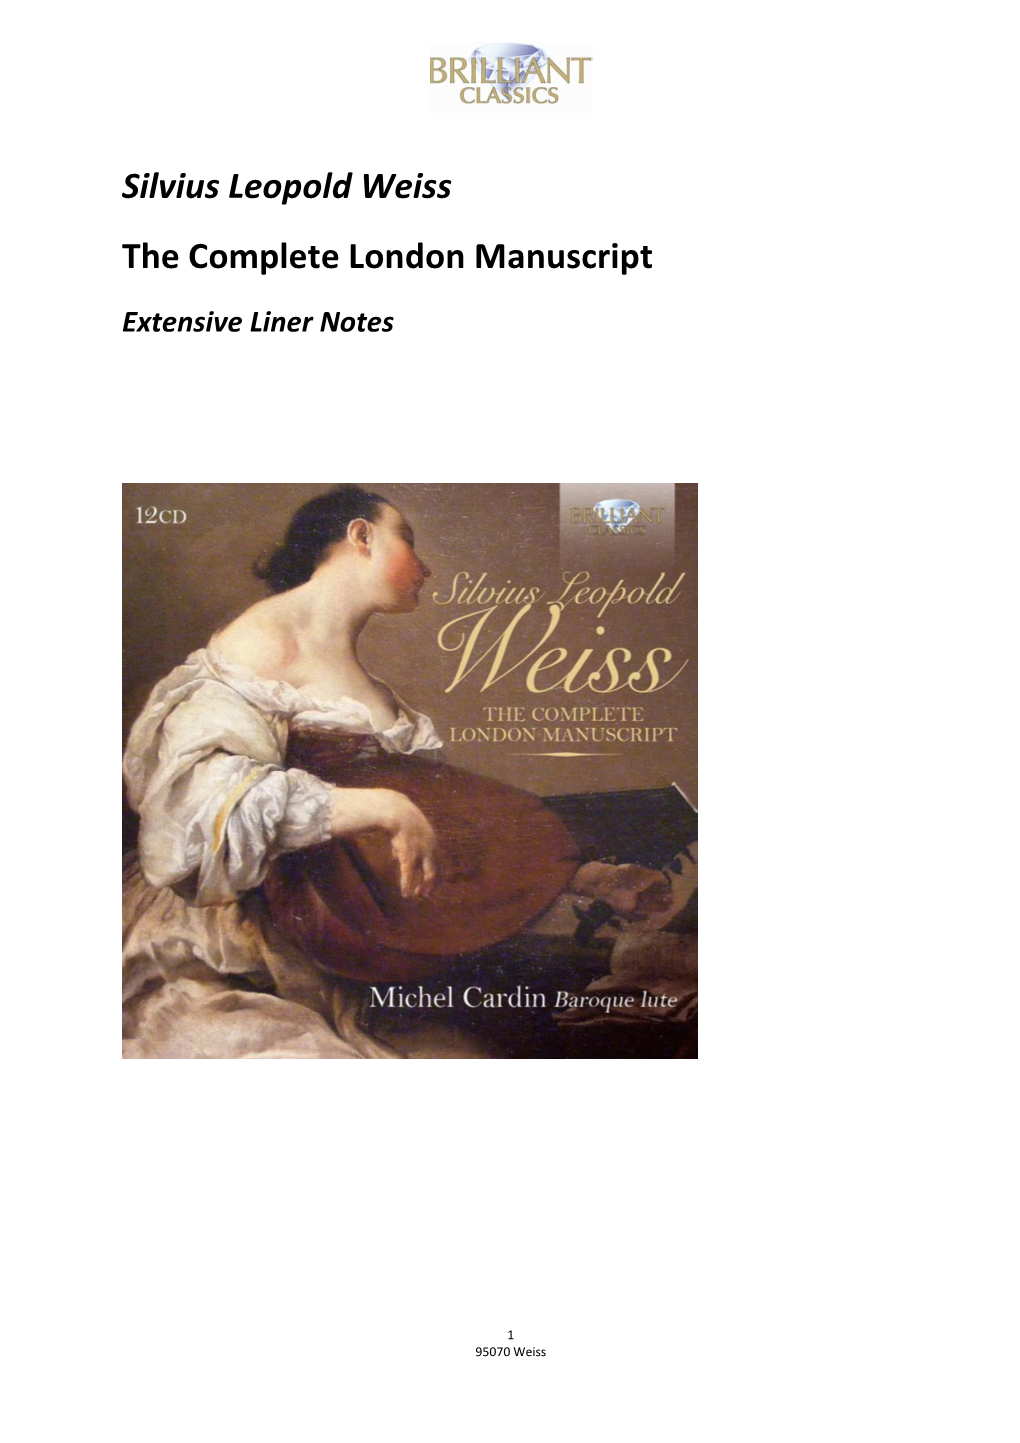 Silvius Leopold Weiss the Complete London Manuscript